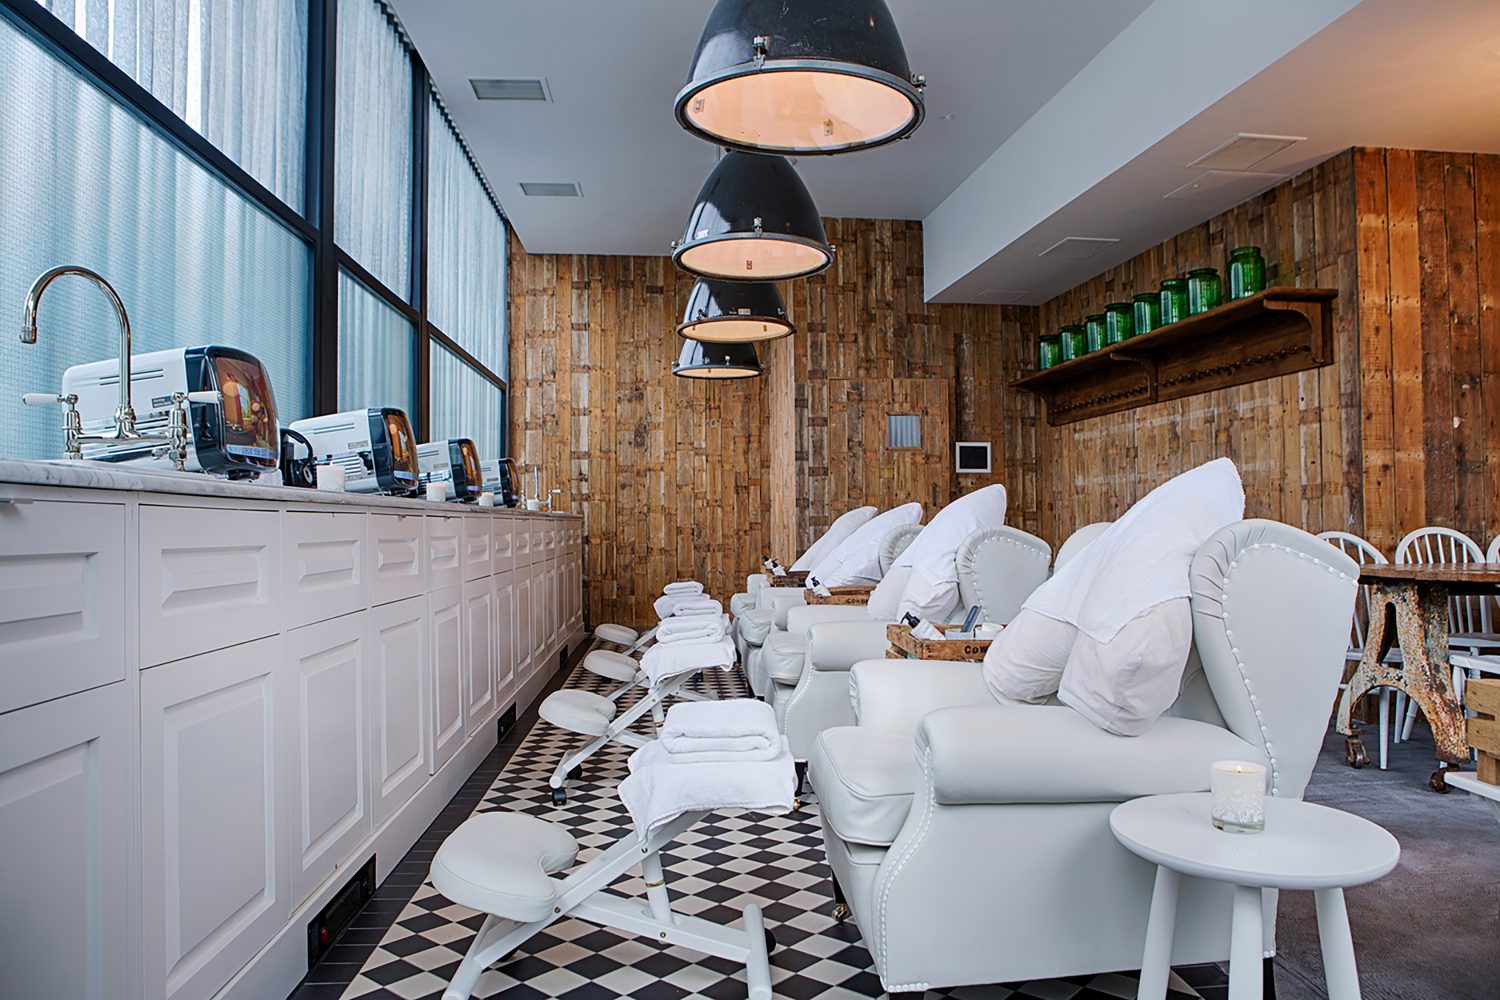 Soho House & Co, Image of Cowshed, Beauty and Spa Design, by Household.